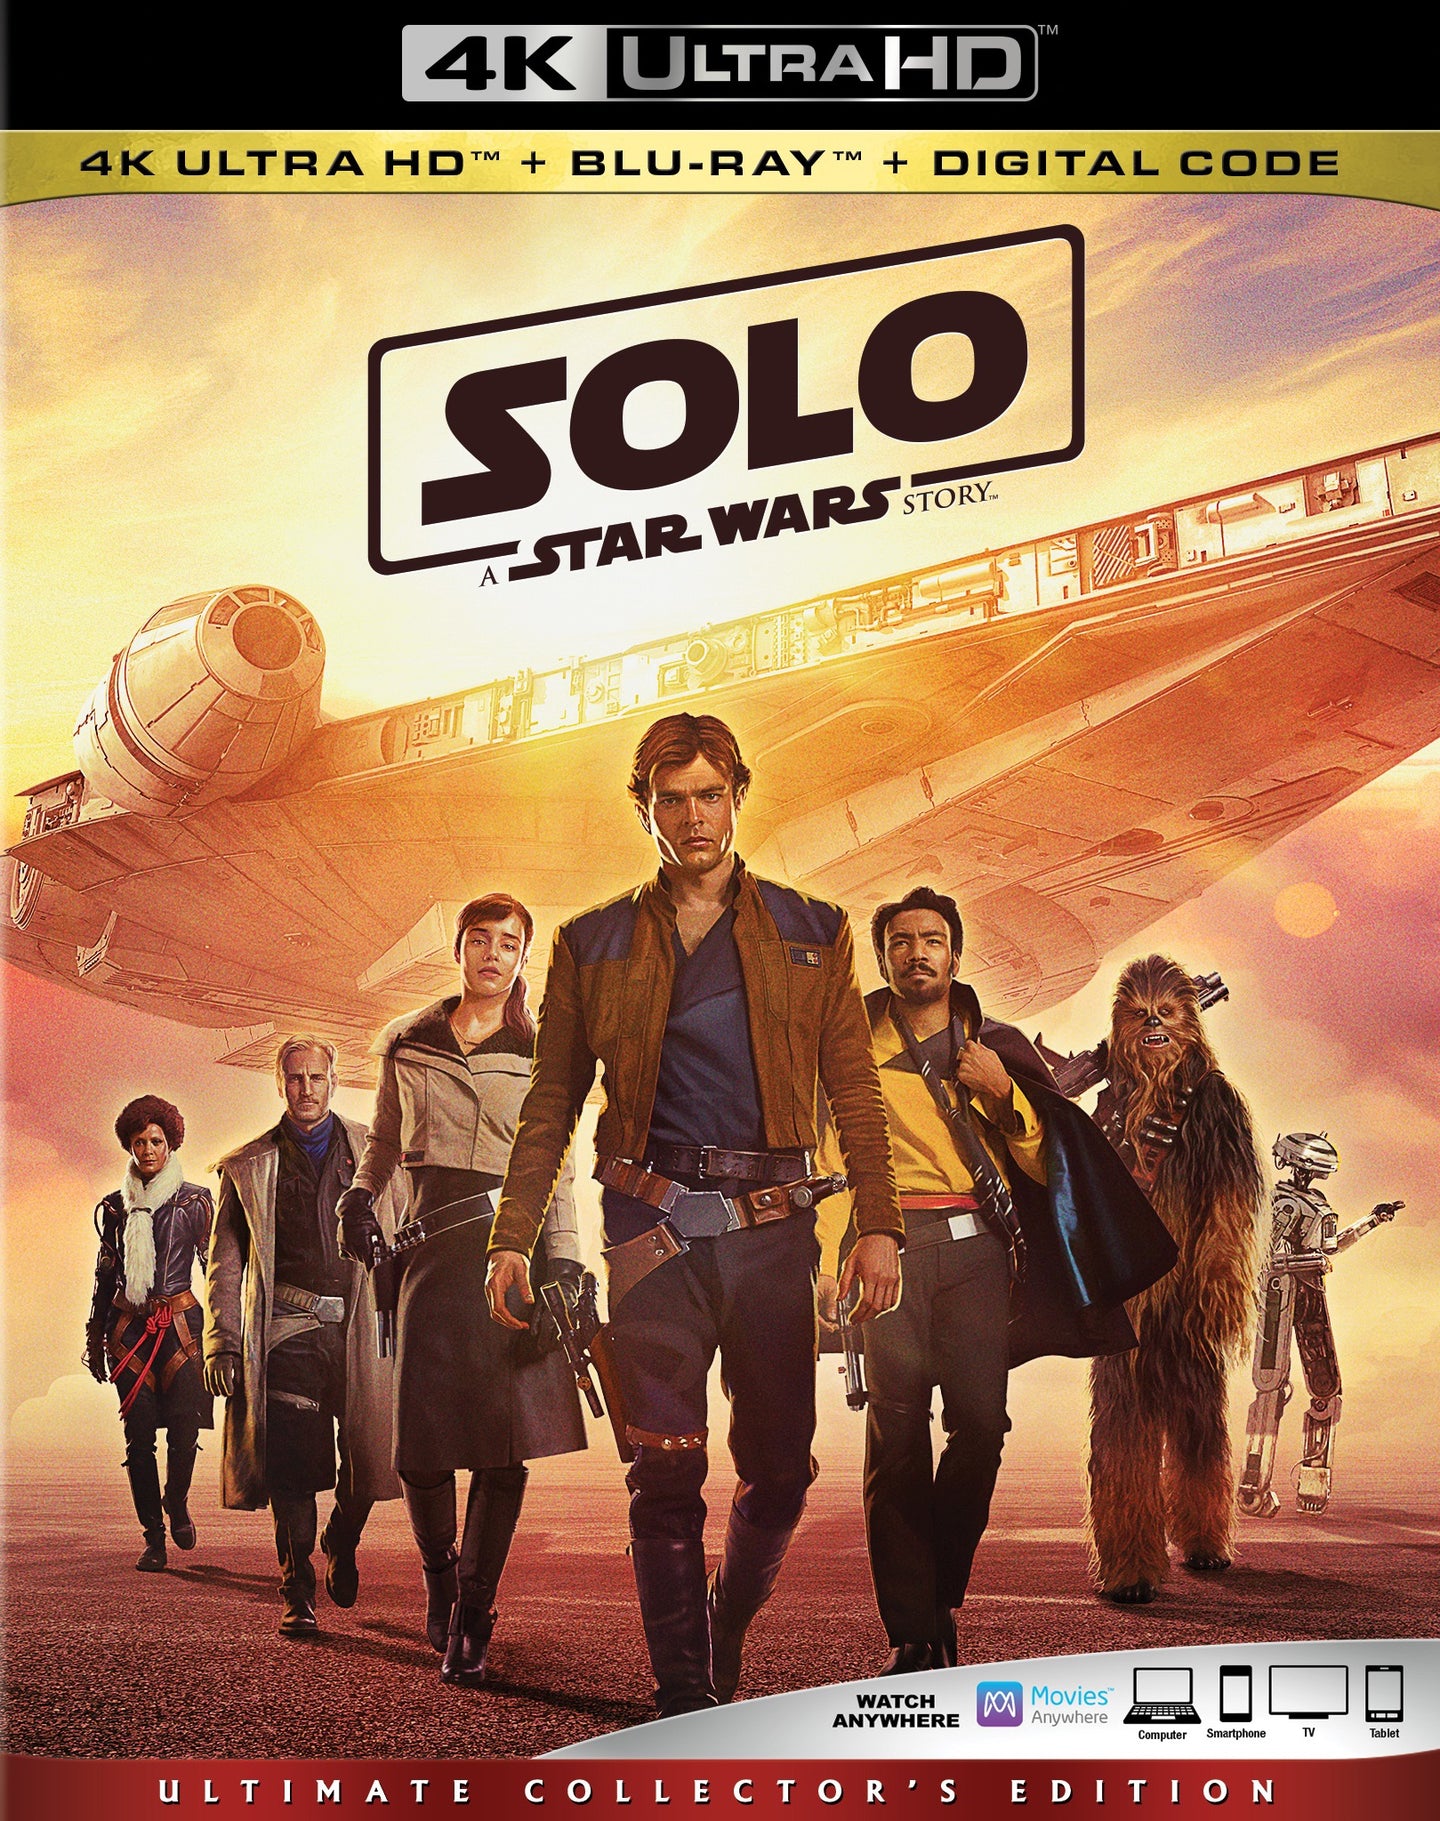 Solo: A Star Wars Story (2018) Vudu or Movies Anywhere 4K redemption only